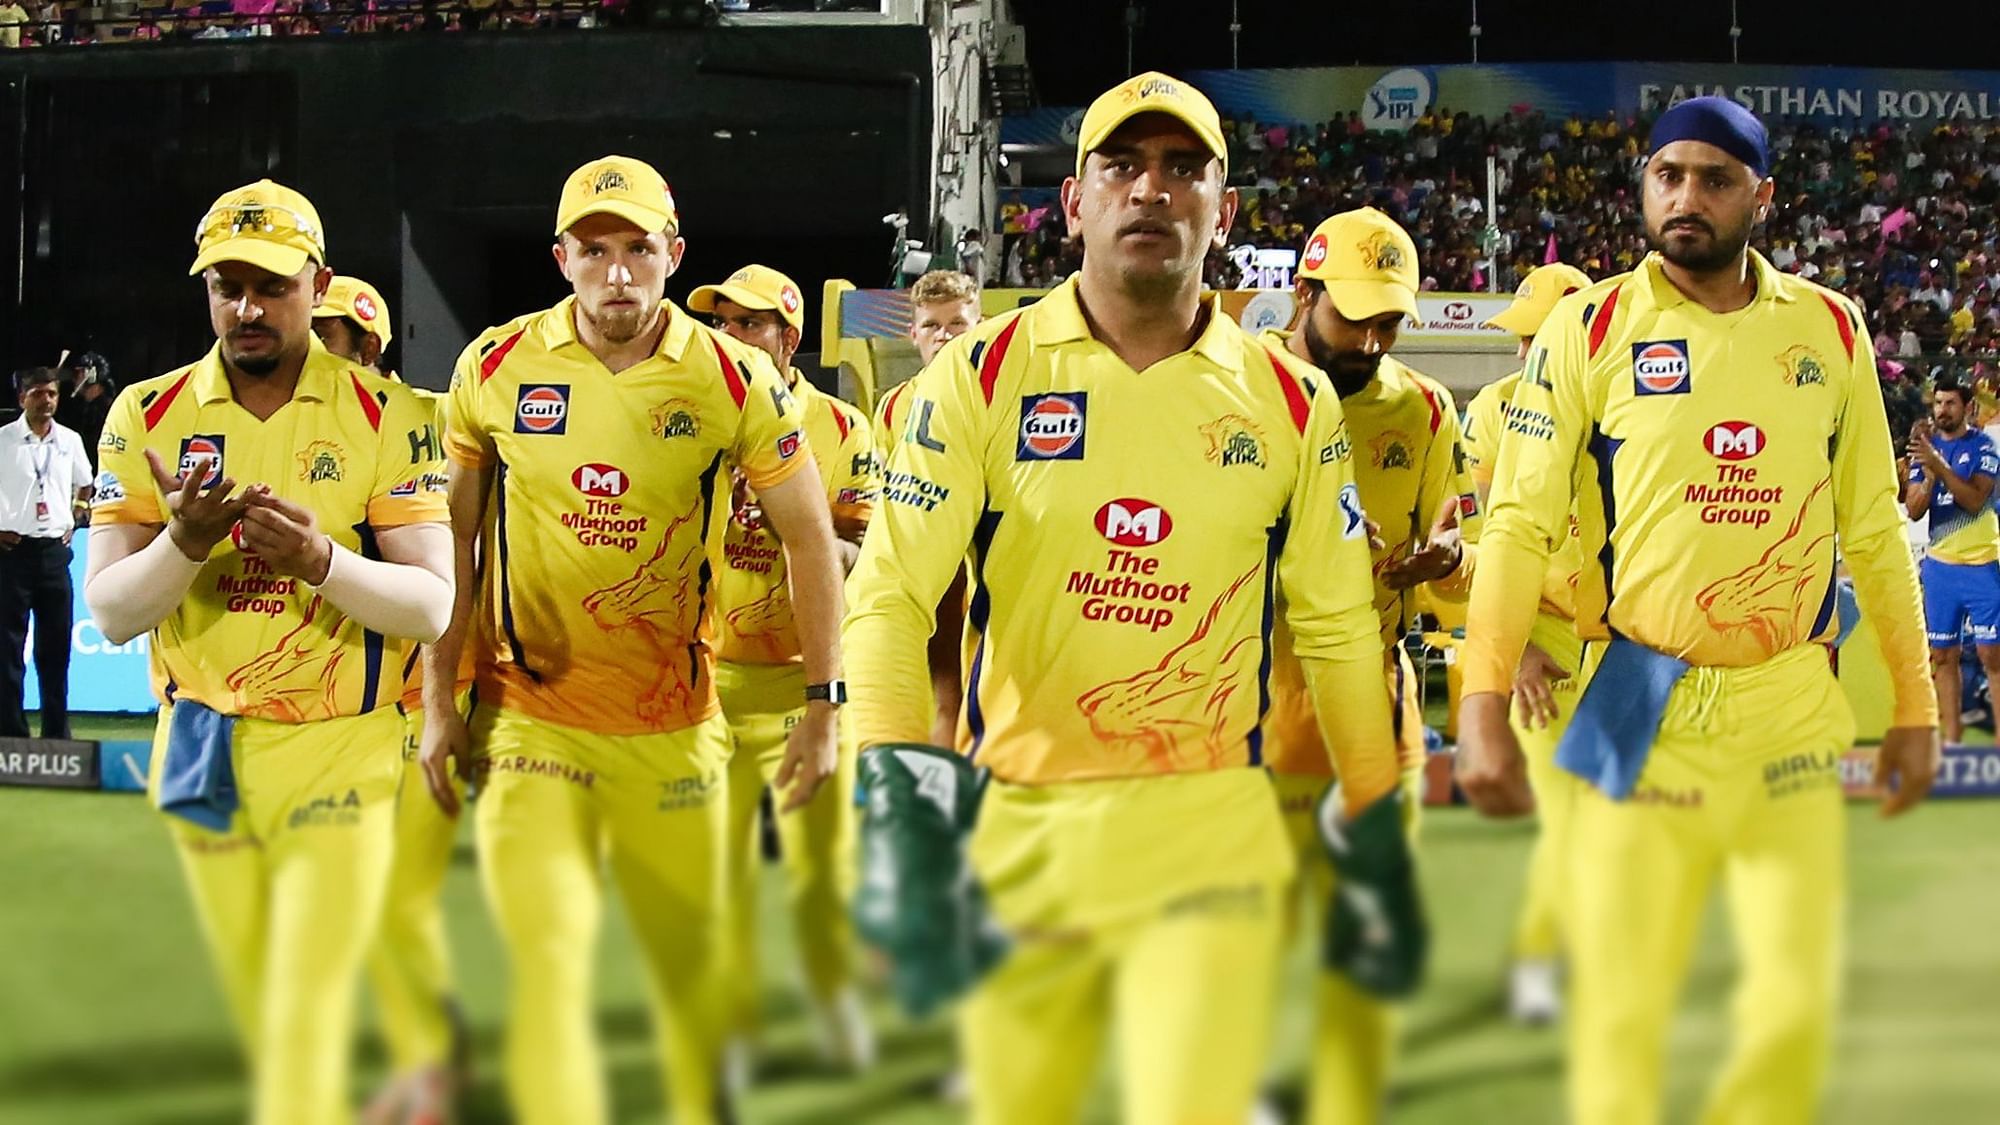 MS Dhoni’s Chennai Super Kings returned to the IPL last season and won the league. However, the 2019 edition has already hit major roadblocks, months before the start of the season.&nbsp;